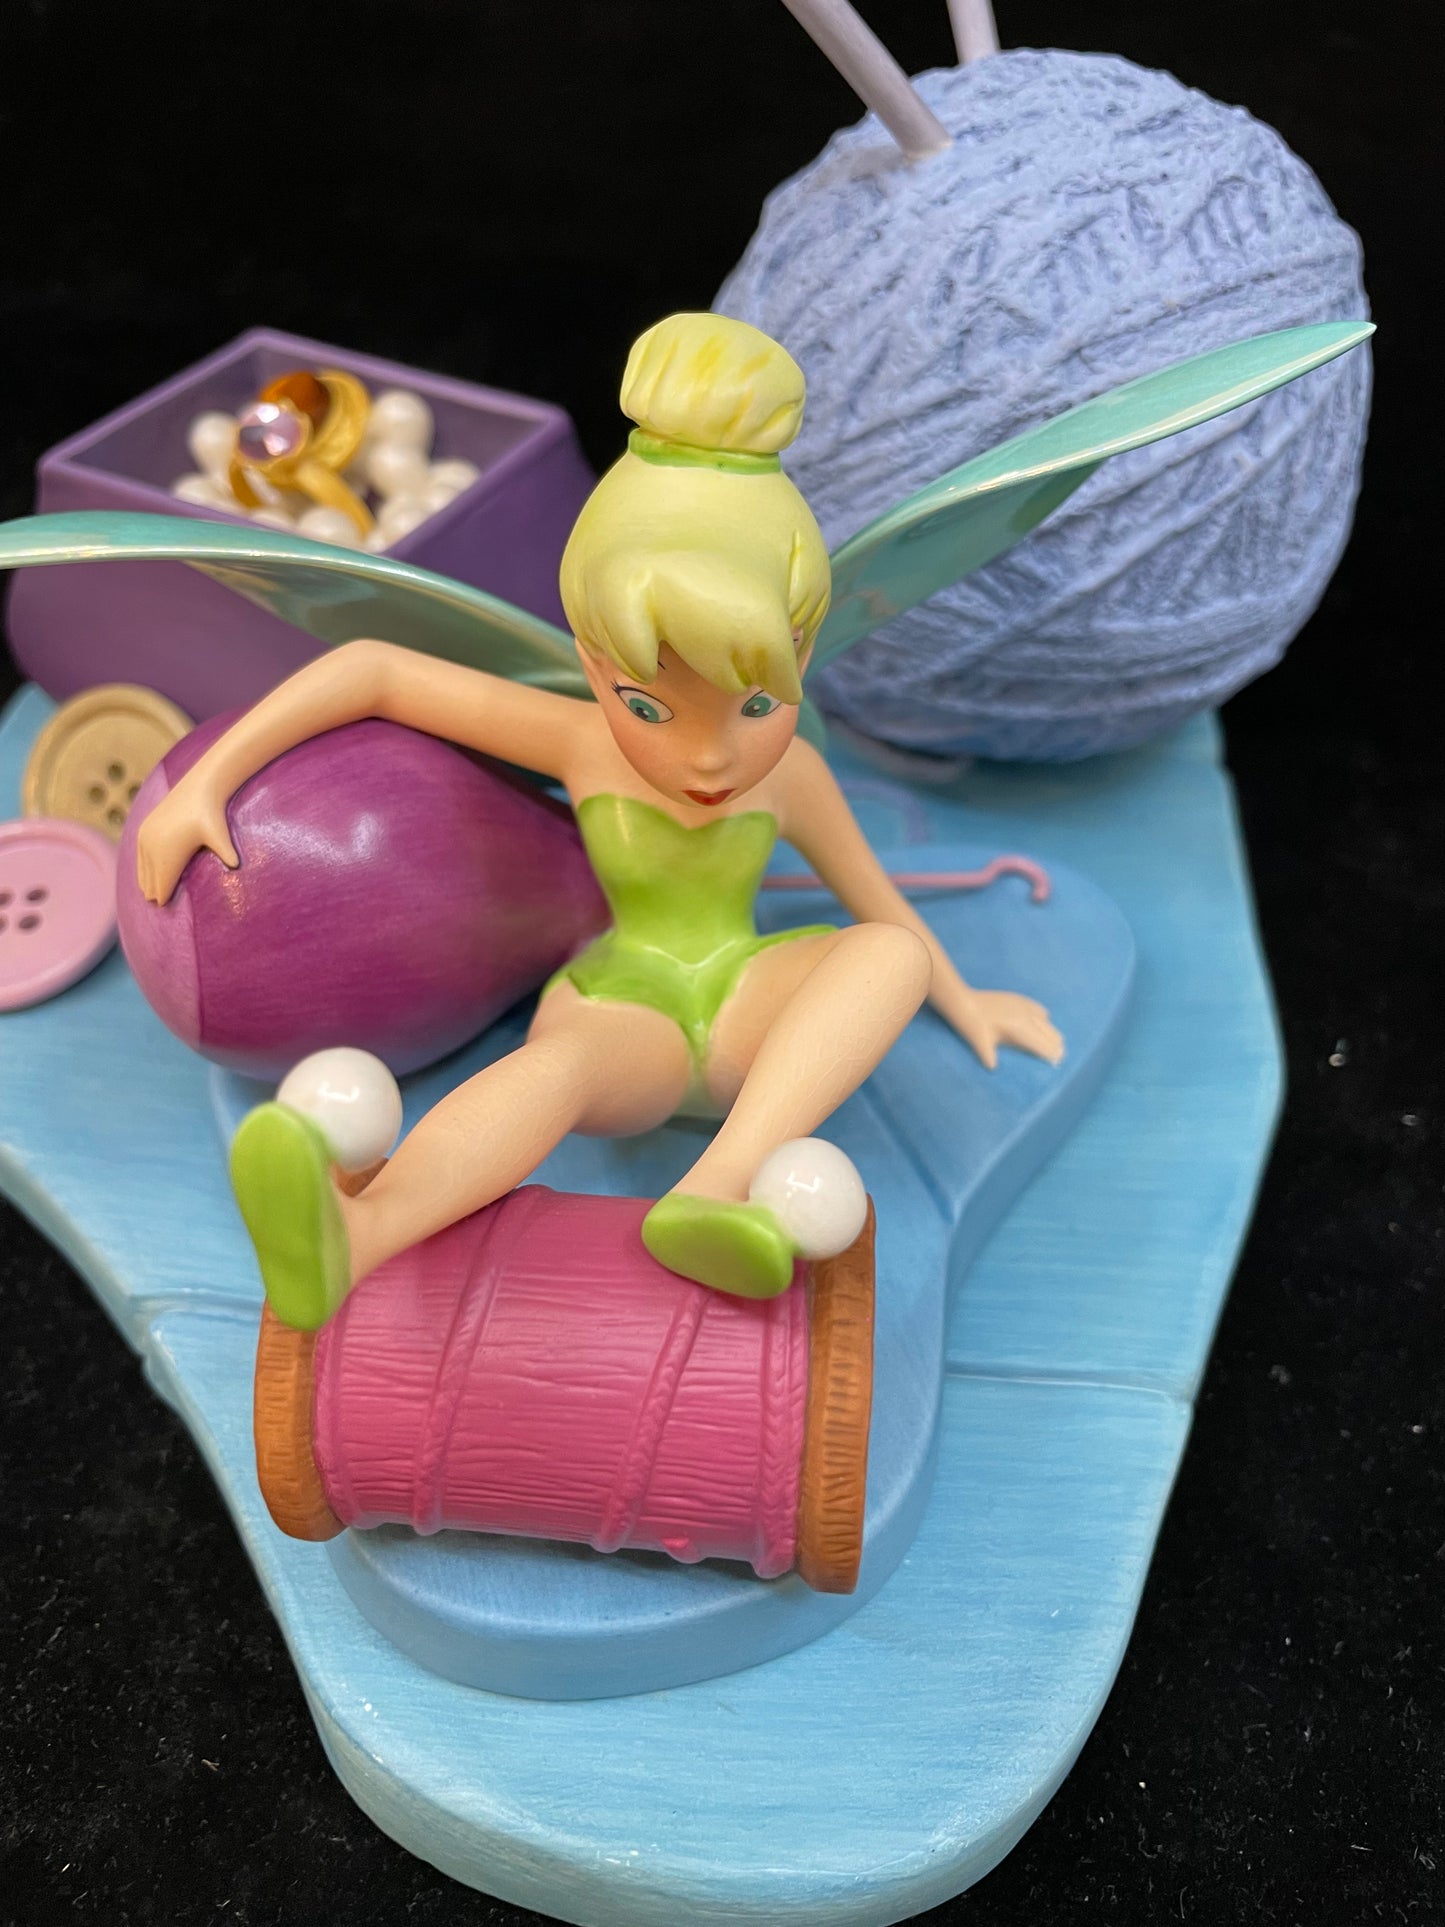 Walt Disney Classics Collection "Tinkerbell" Porcelain Figurine and Base